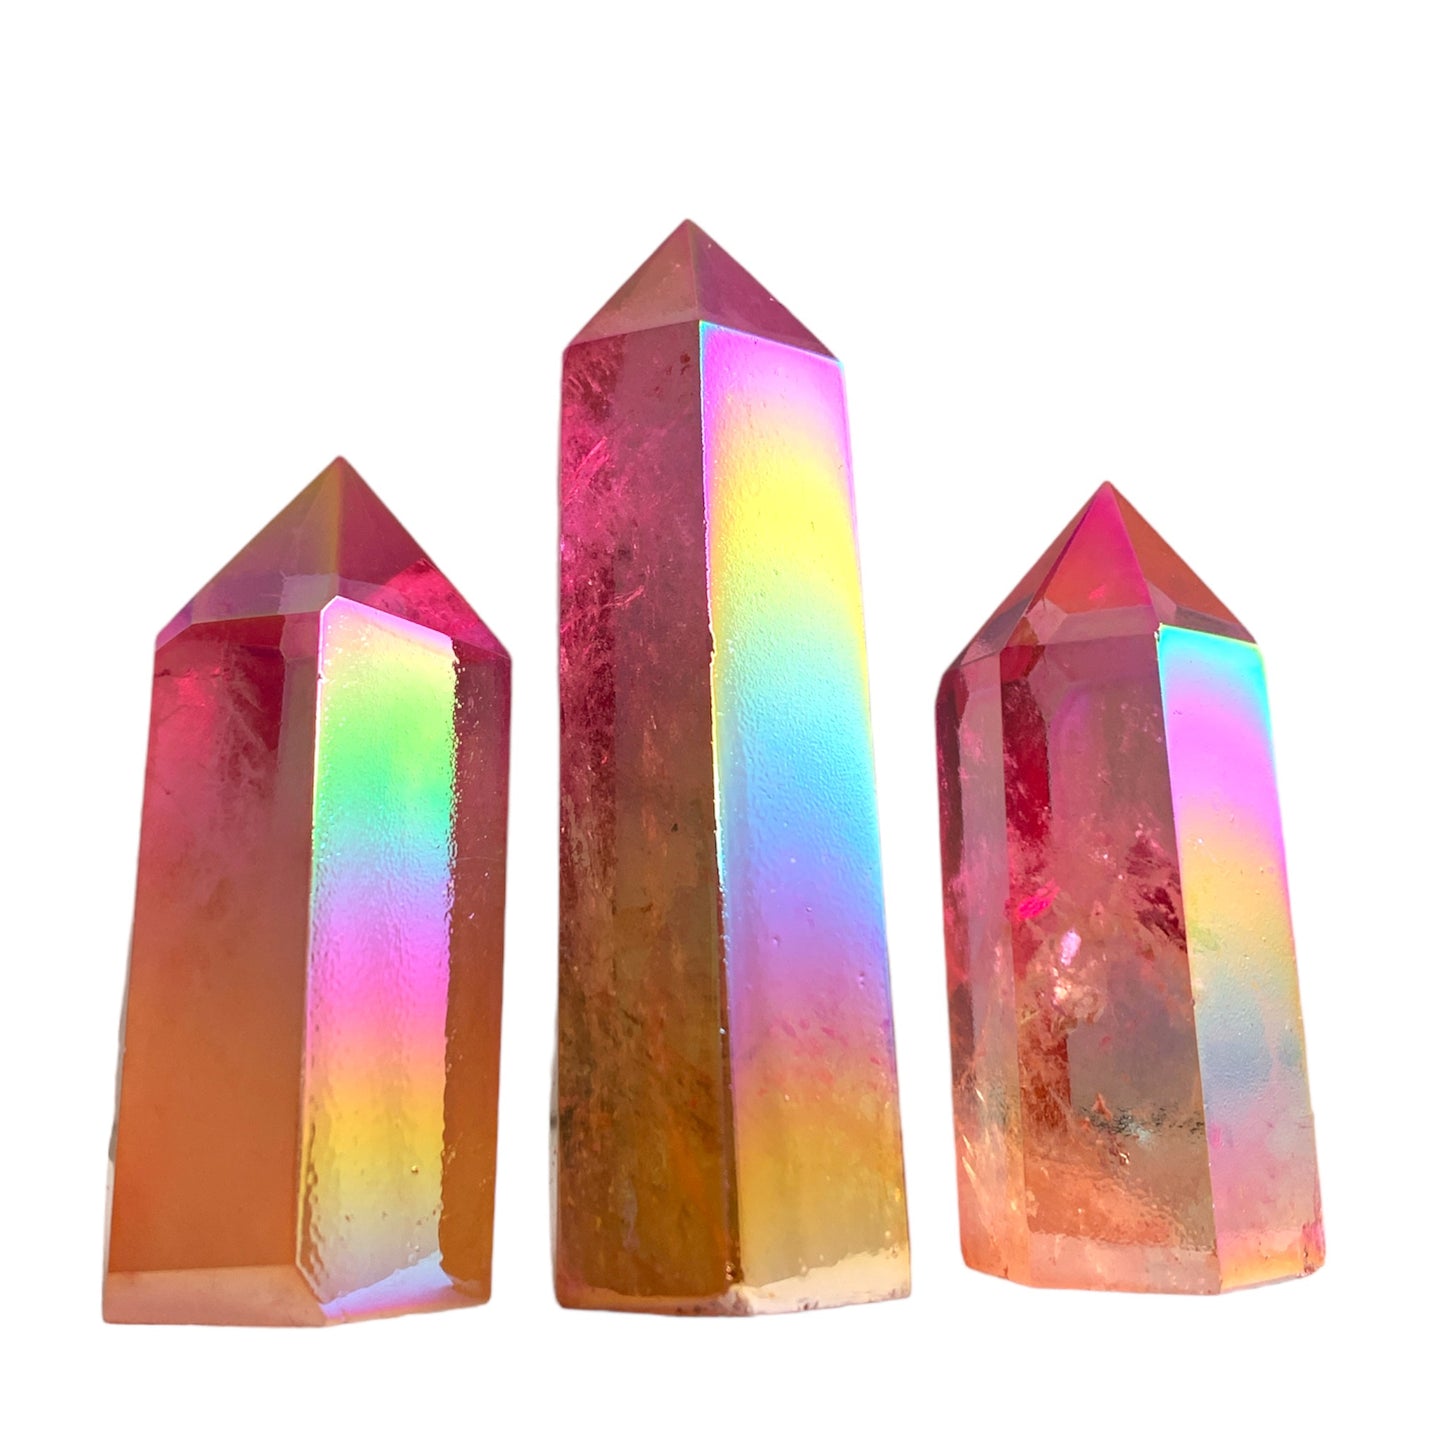 Clear Quartz Aura (Red Pink Yellow) - 3-4 inch - Price per gram - NEW423 - Polished Points